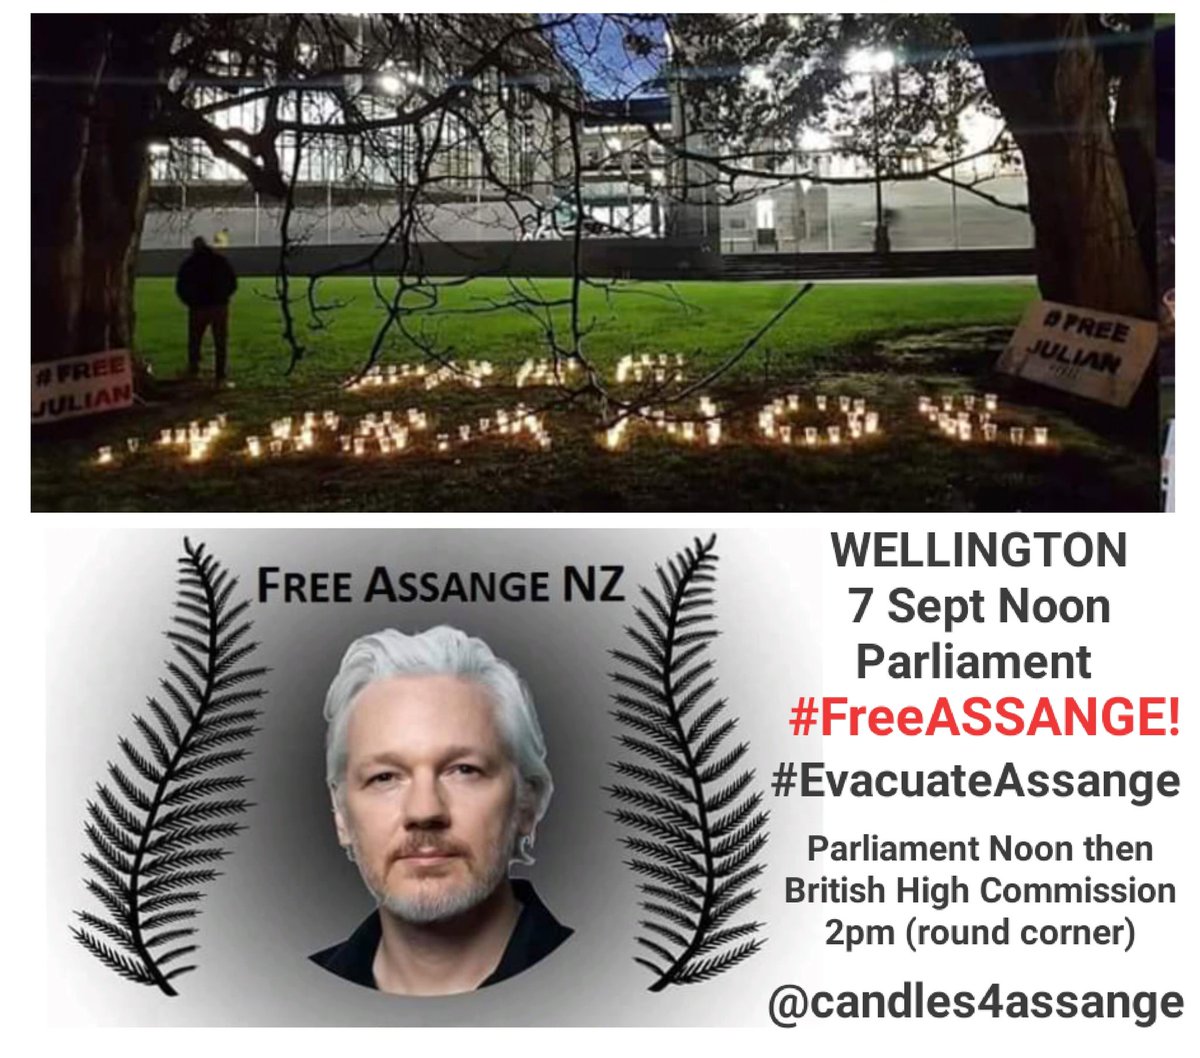 MON Sept 7:LONDON9am Old Bailey @alimay101234  @ja_defenceWASHINGTON DCNoon National Mall @action_4assangeTORONTO9am US consulate @mcmastersteve WELLINGTON12 Noon NZ Parliament(then British High Commission 2pm) @GreenweaverArch